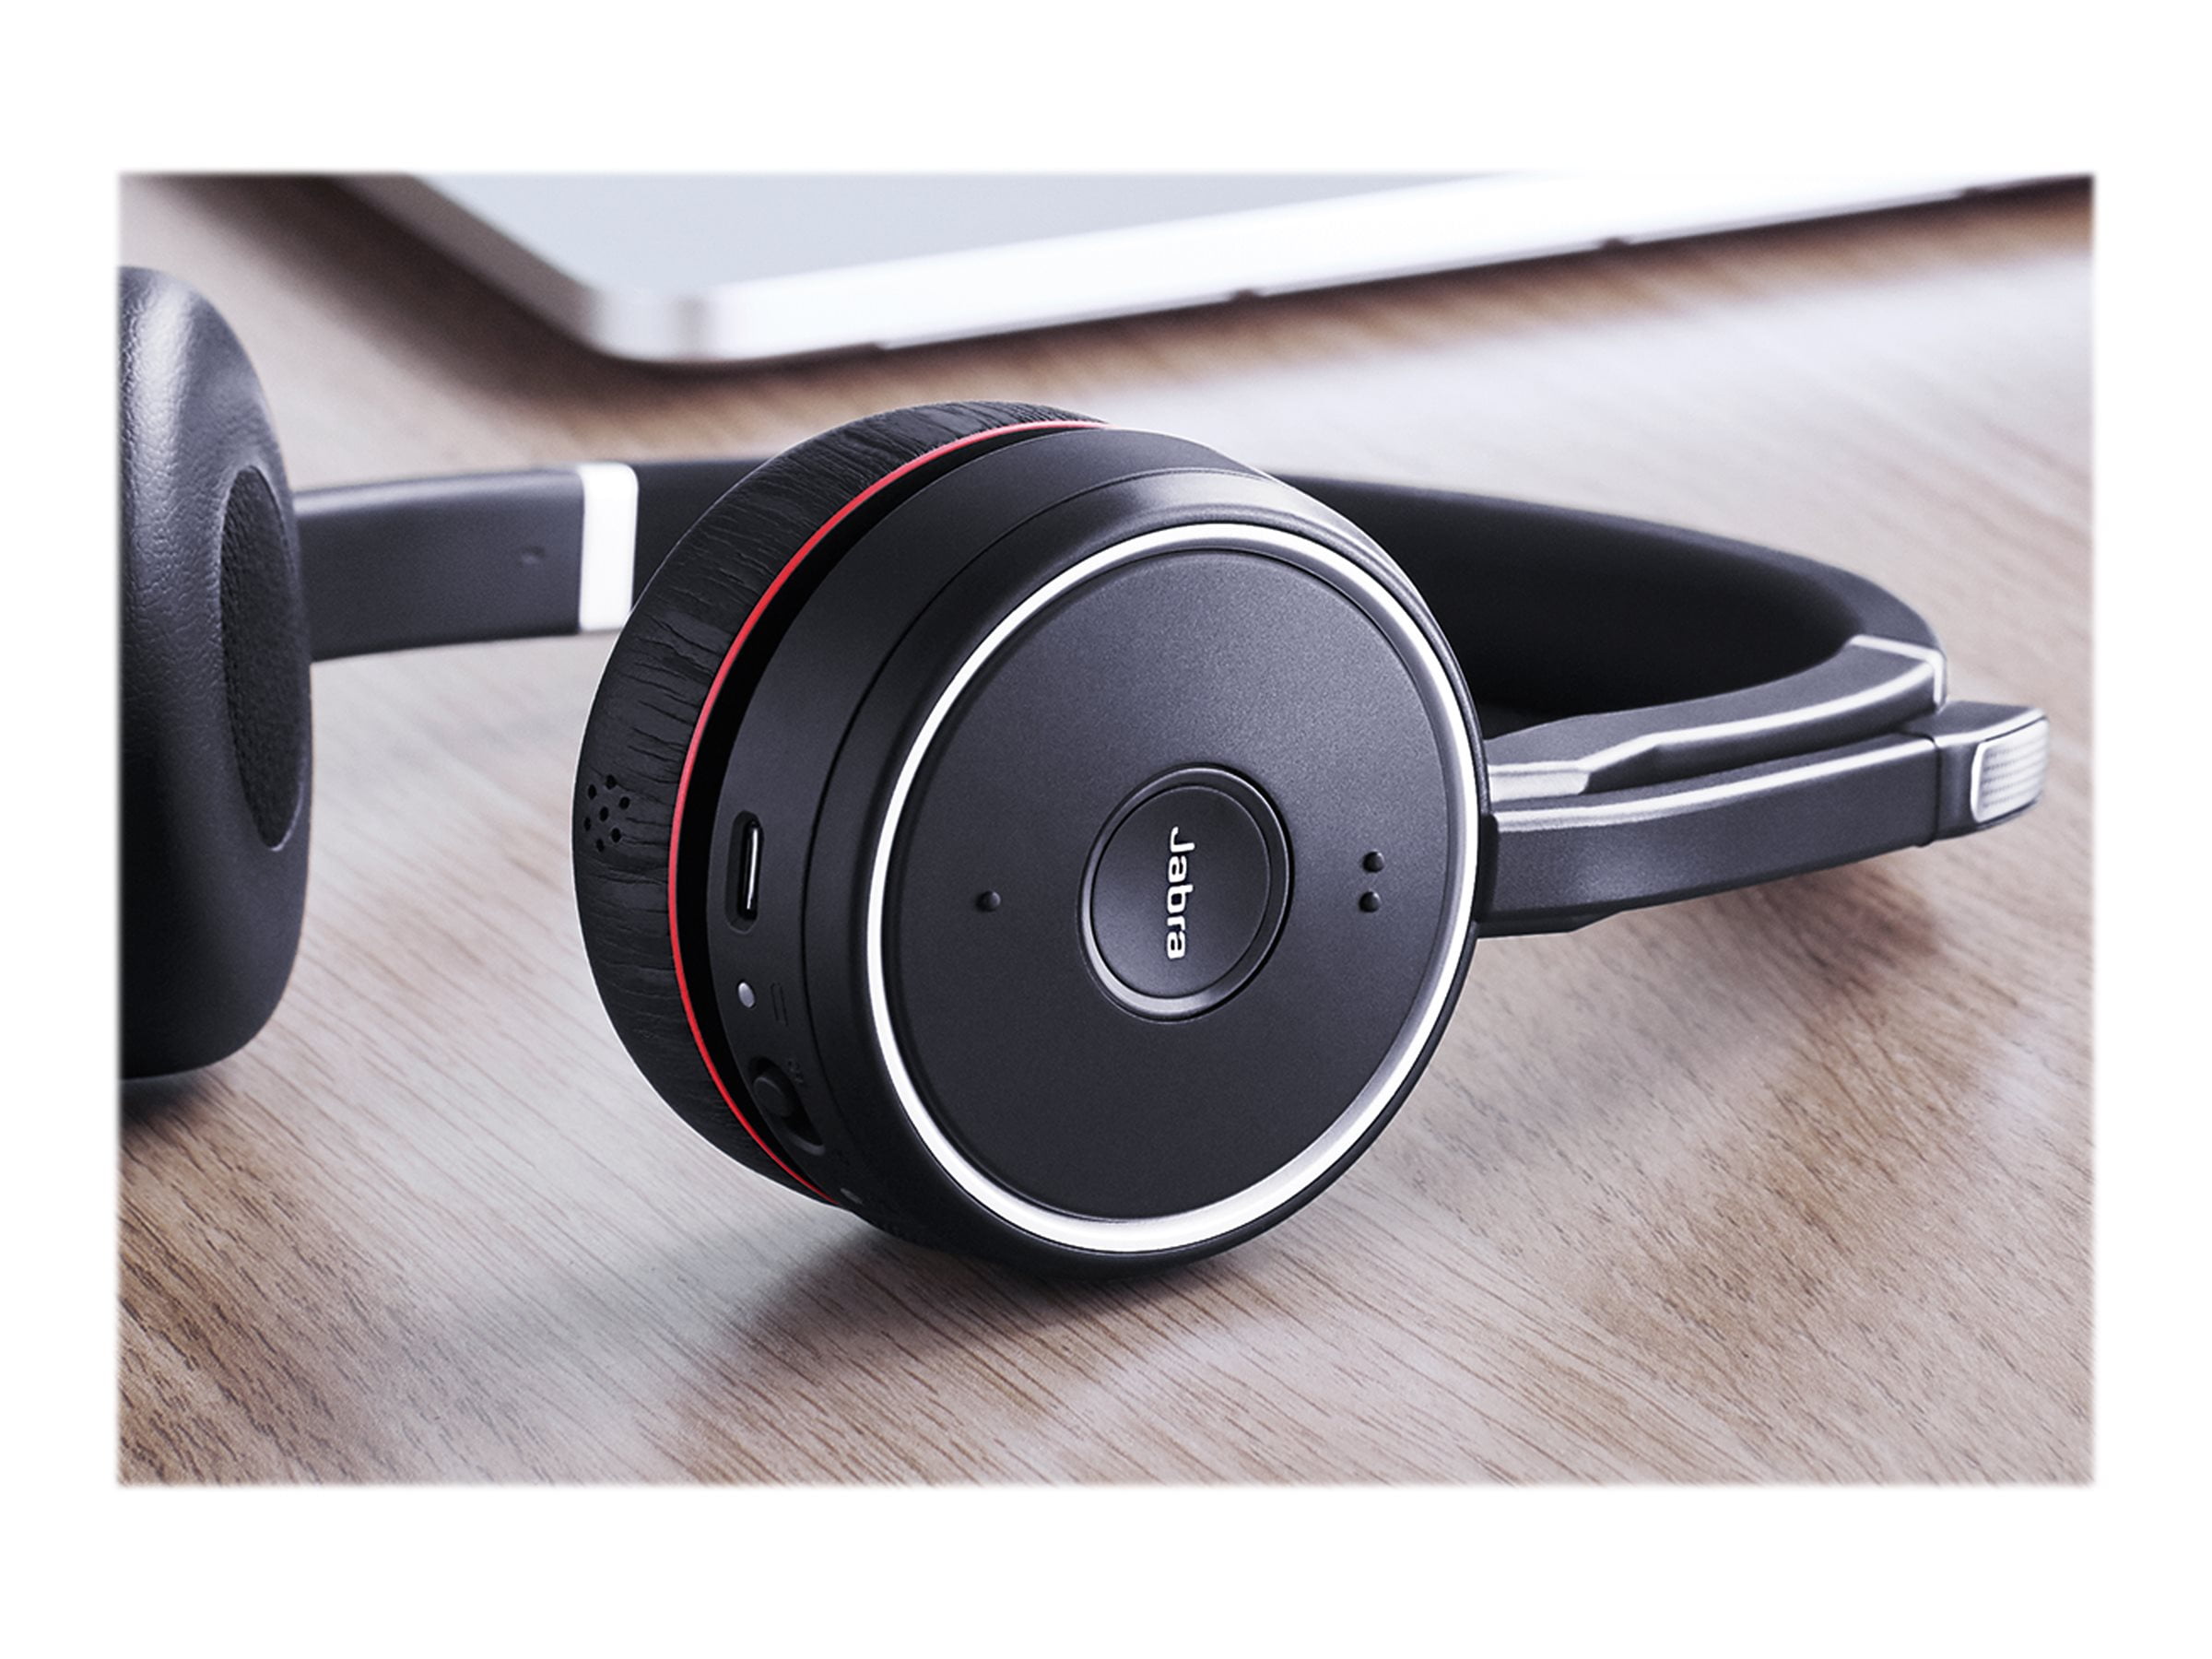 jabra evolve 75-is a wireless headset with active noise cancellation